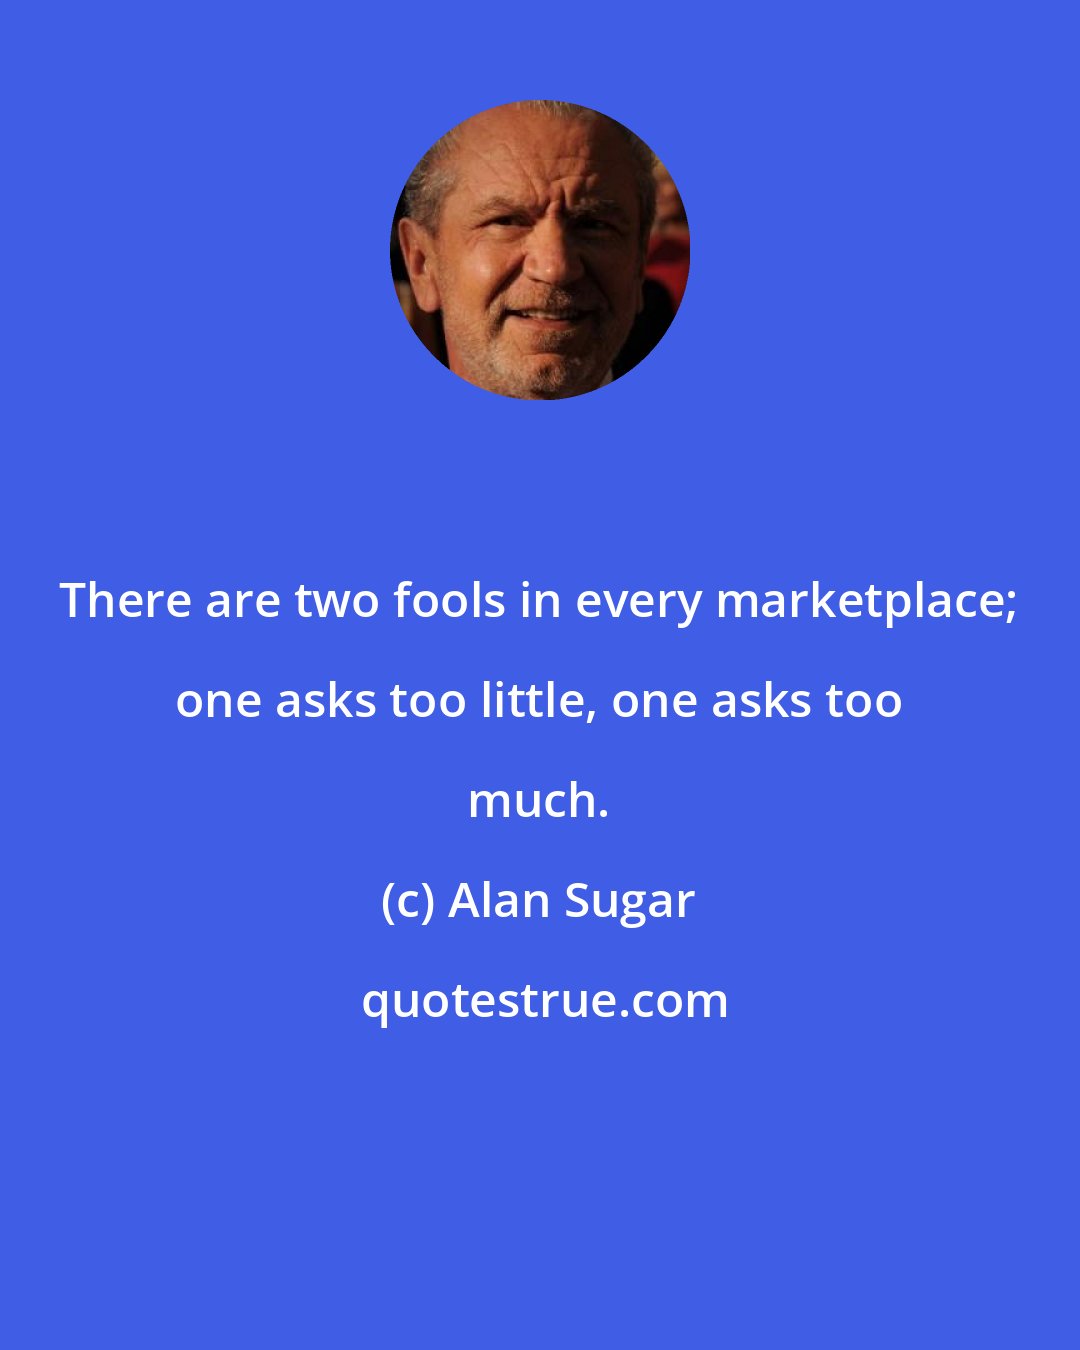 Alan Sugar: There are two fools in every marketplace; one asks too little, one asks too much.